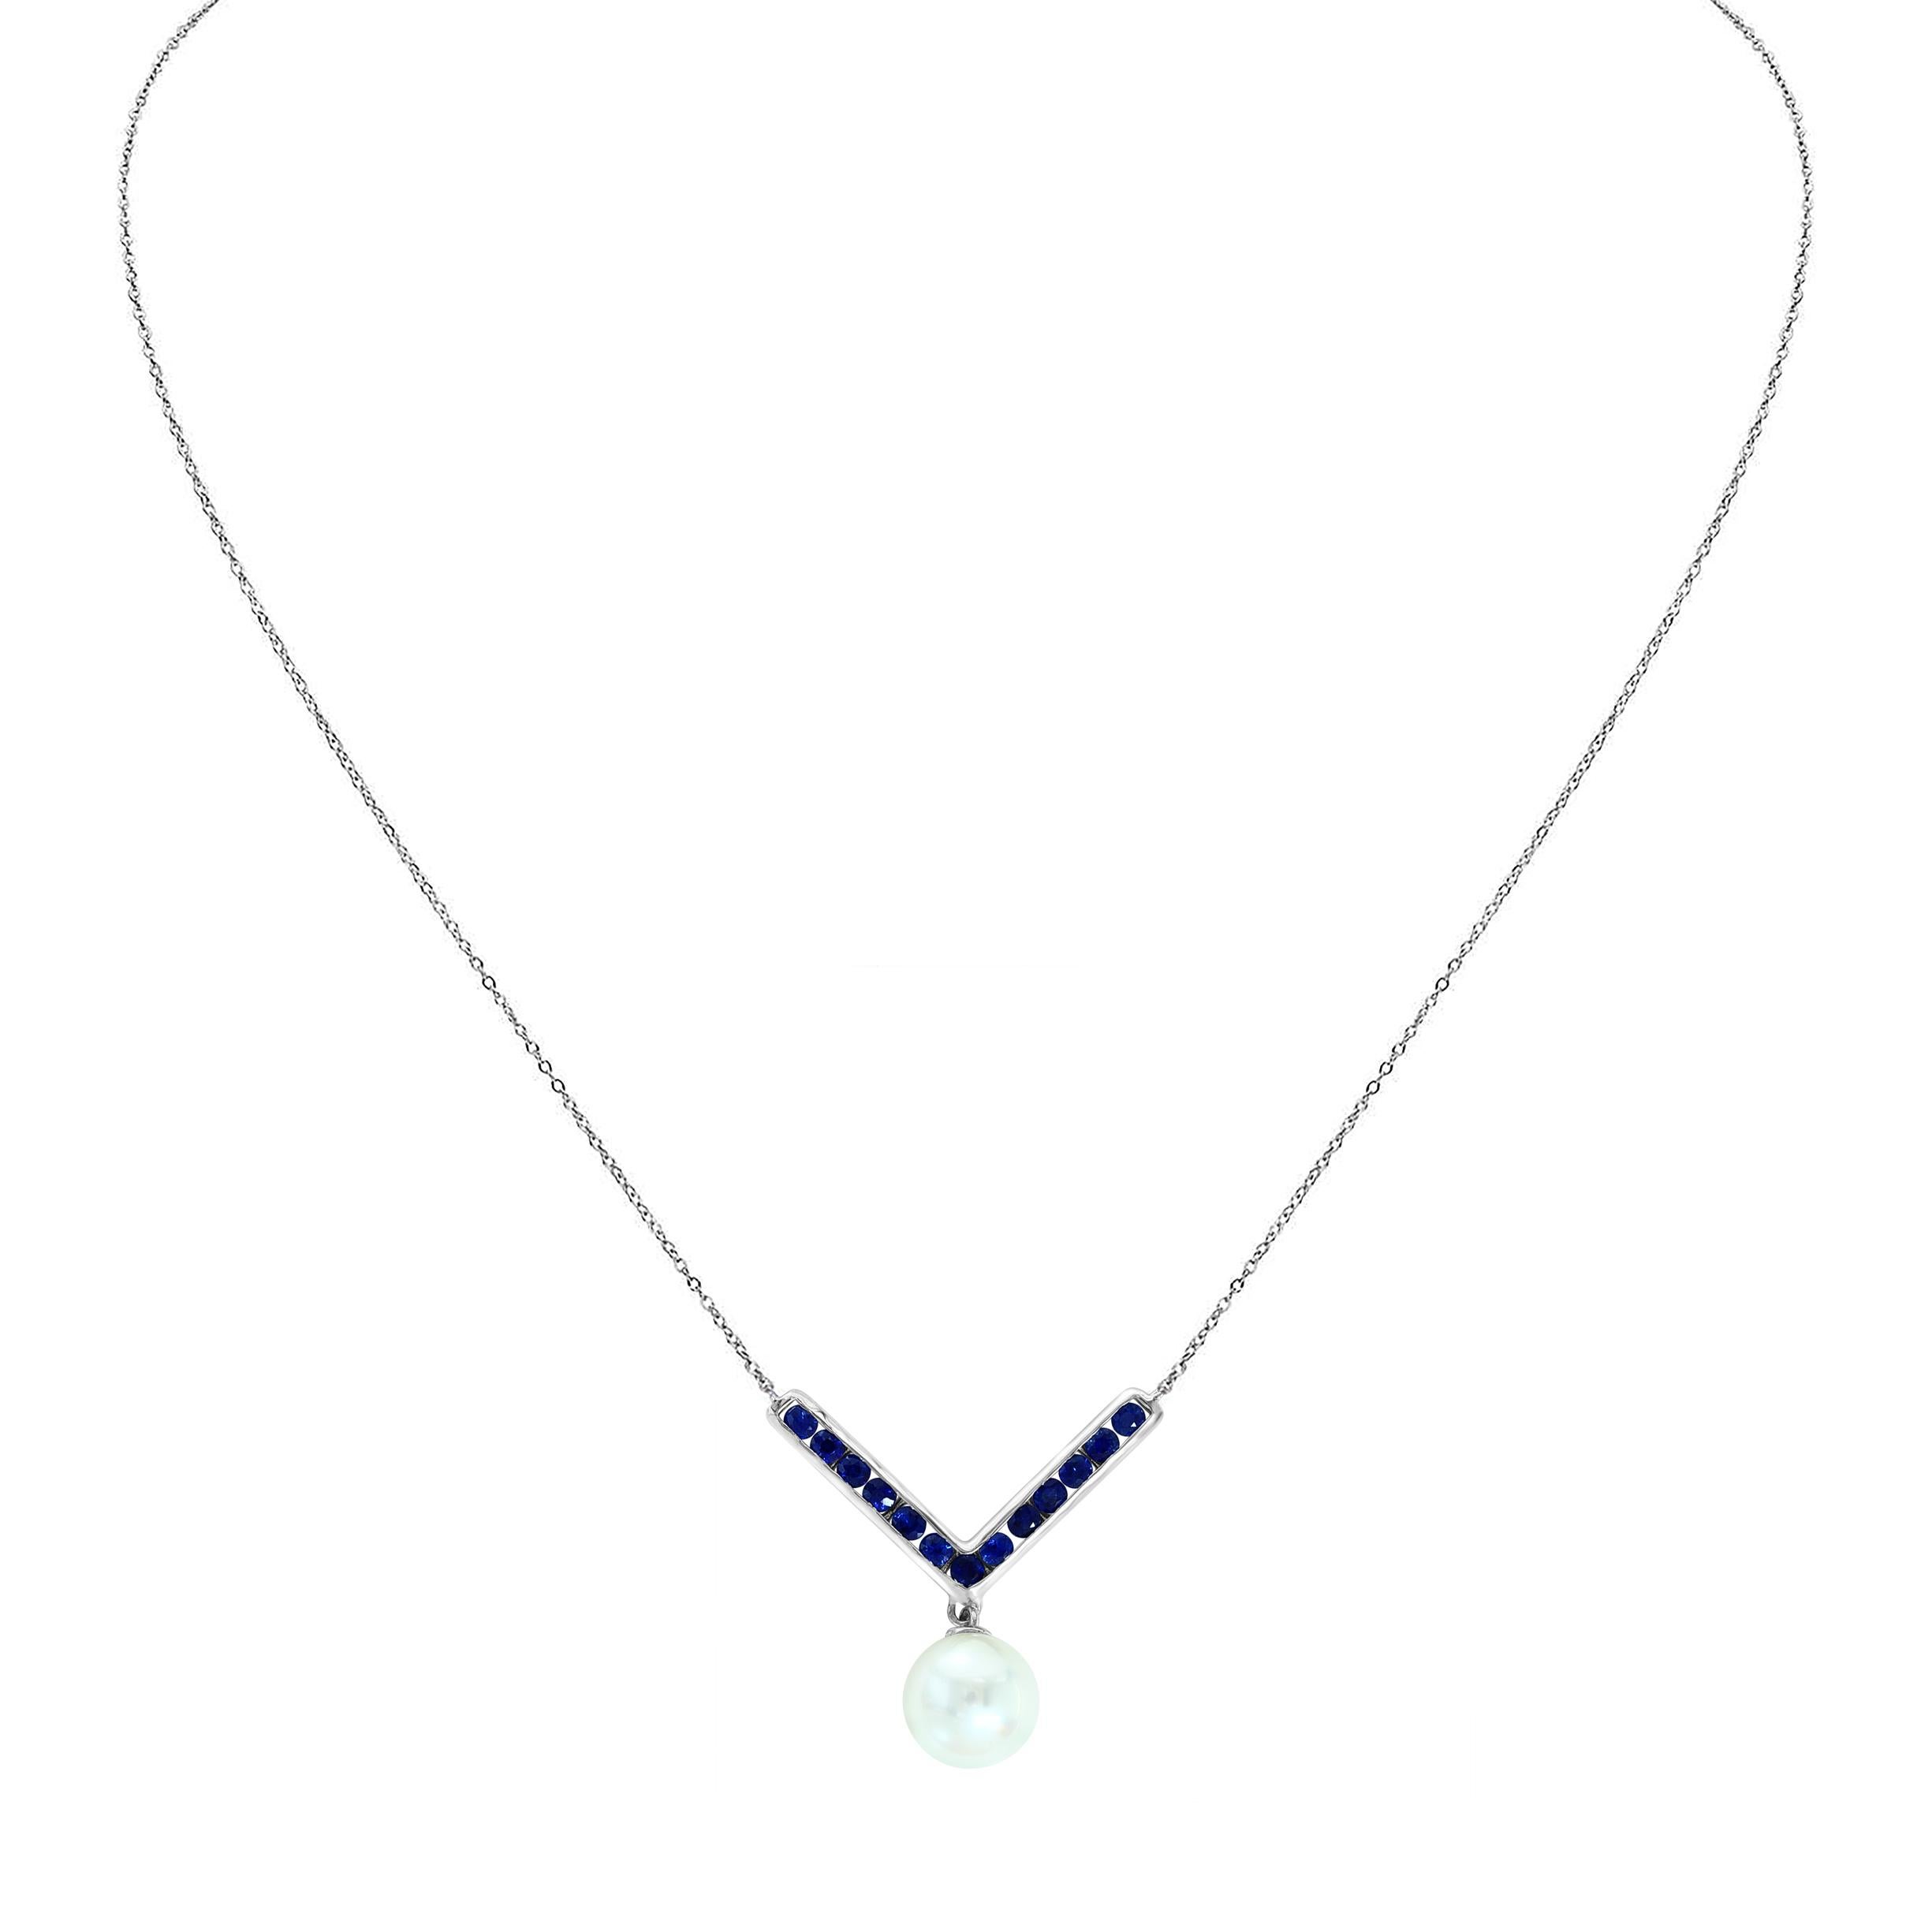 This popular style features a round Freshwater white pearl measuring 7-7.5mm dangling from a blue sapphire chevron style detail on a .925 Sterling Silver chain. This is a perfect necklace to layer or wear or its own. Enjoy this necklace as an